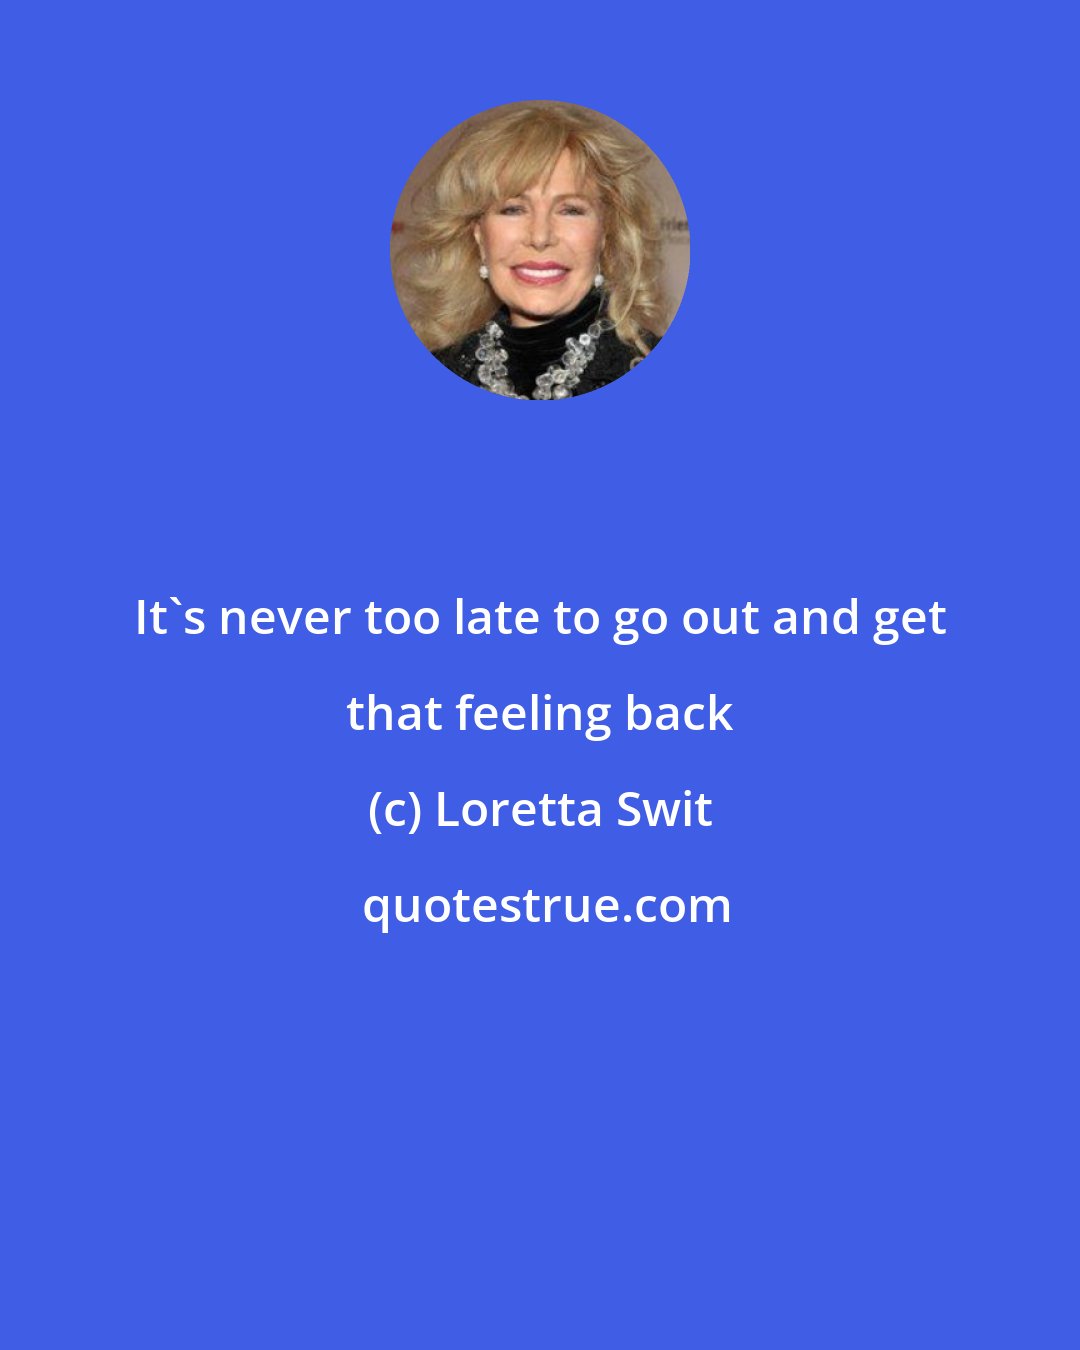 Loretta Swit: It's never too late to go out and get that feeling back